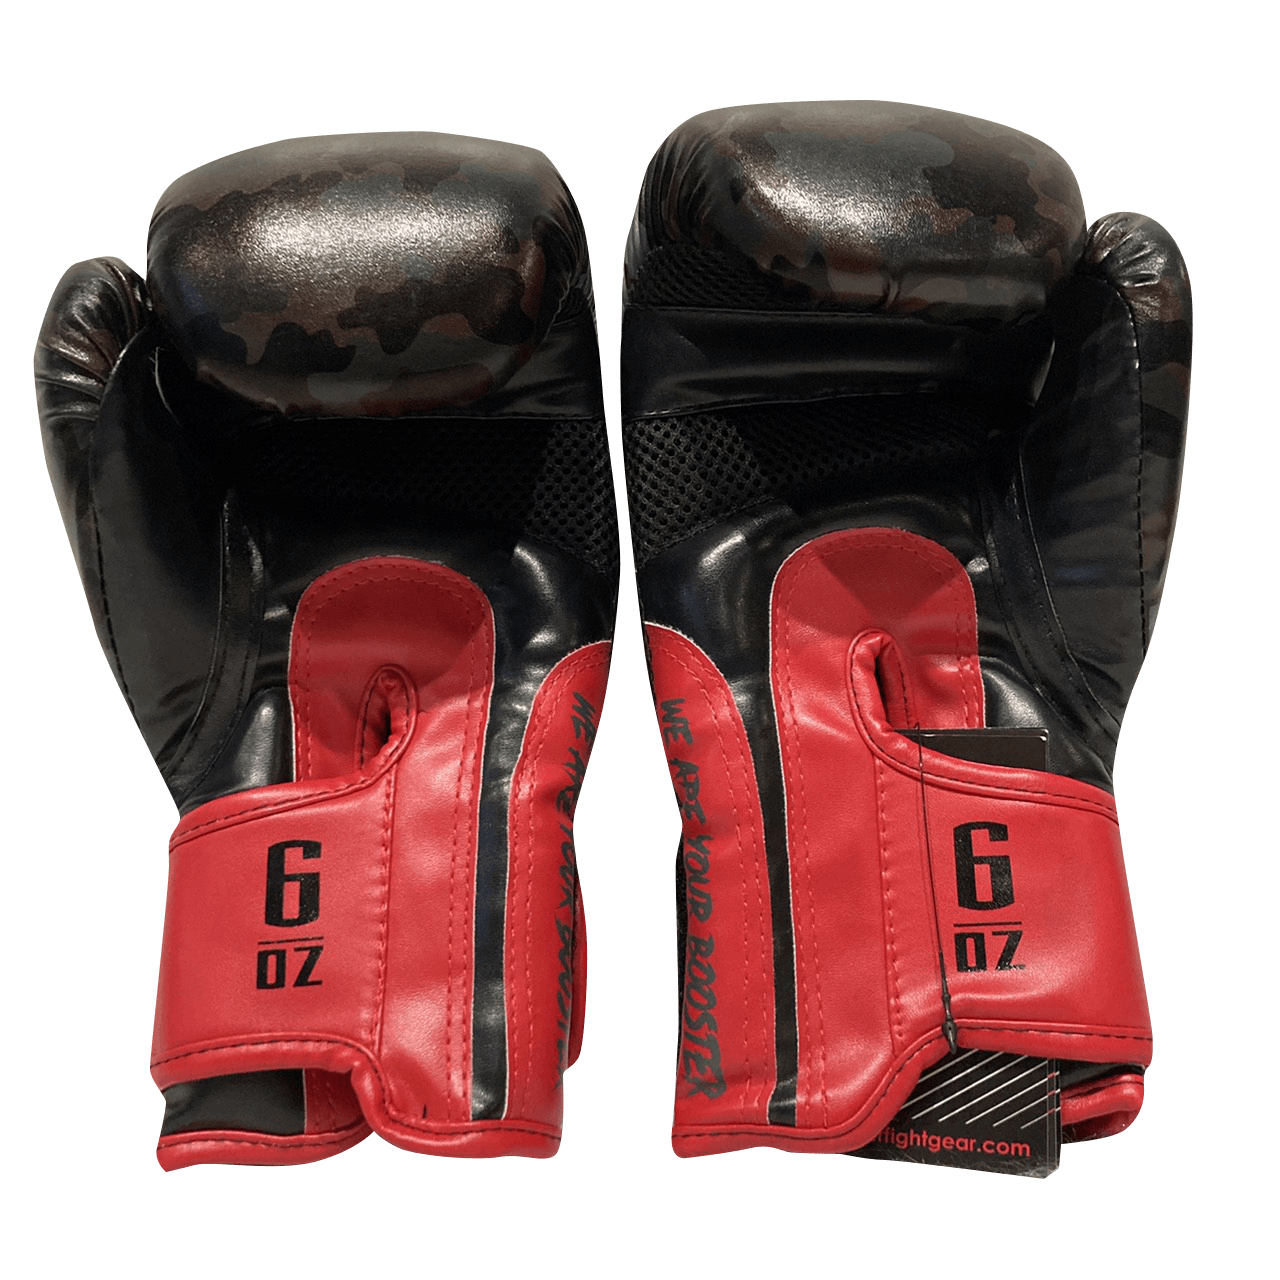 Booster Boxing Gloves Kids Youth CAMO Black - SUPER EXPORT SHOP